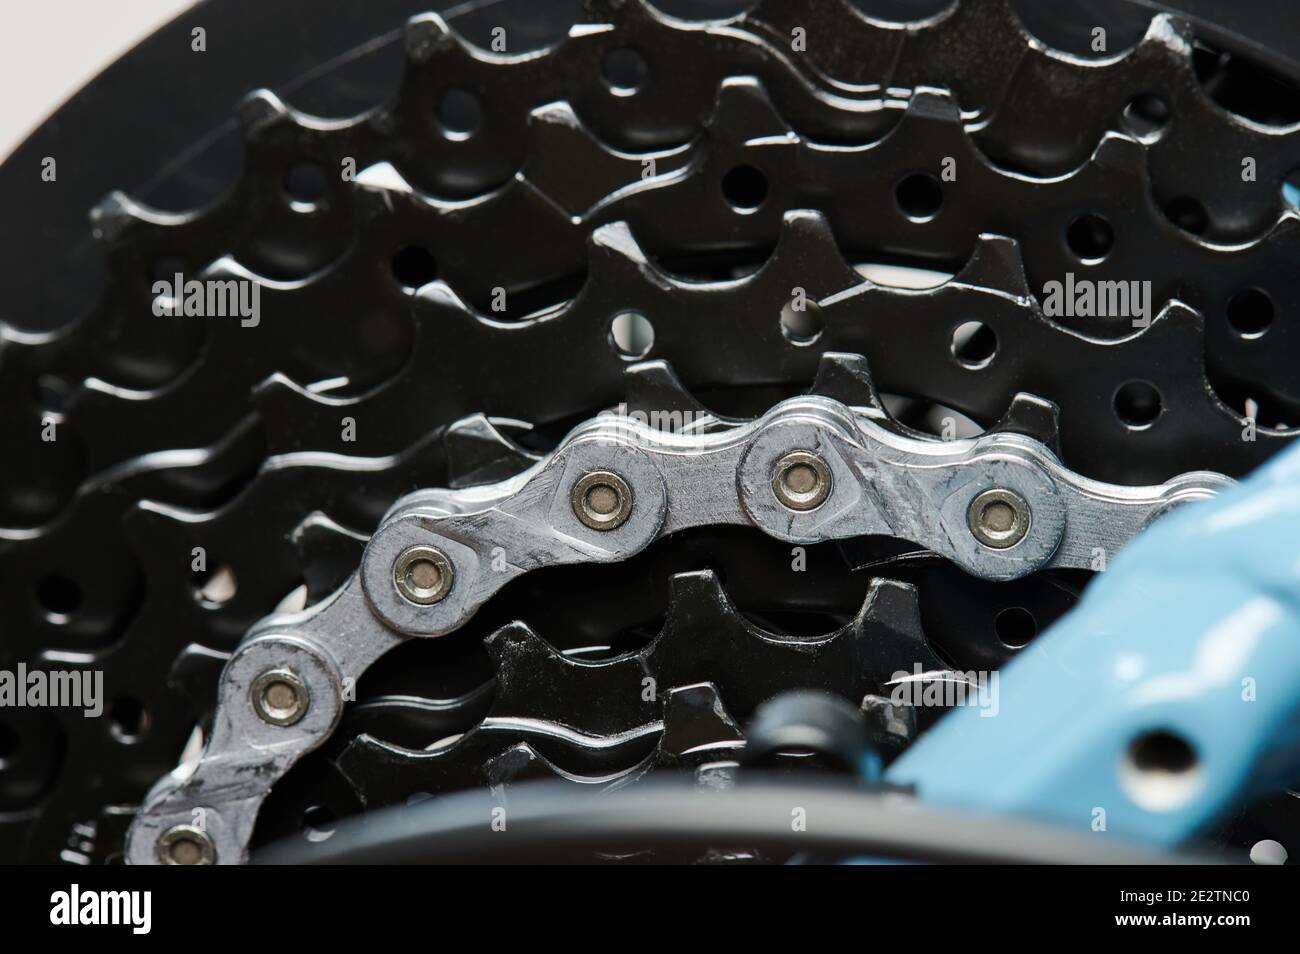 Teeth on metal gear plates of bicycle close up view Stock Photo